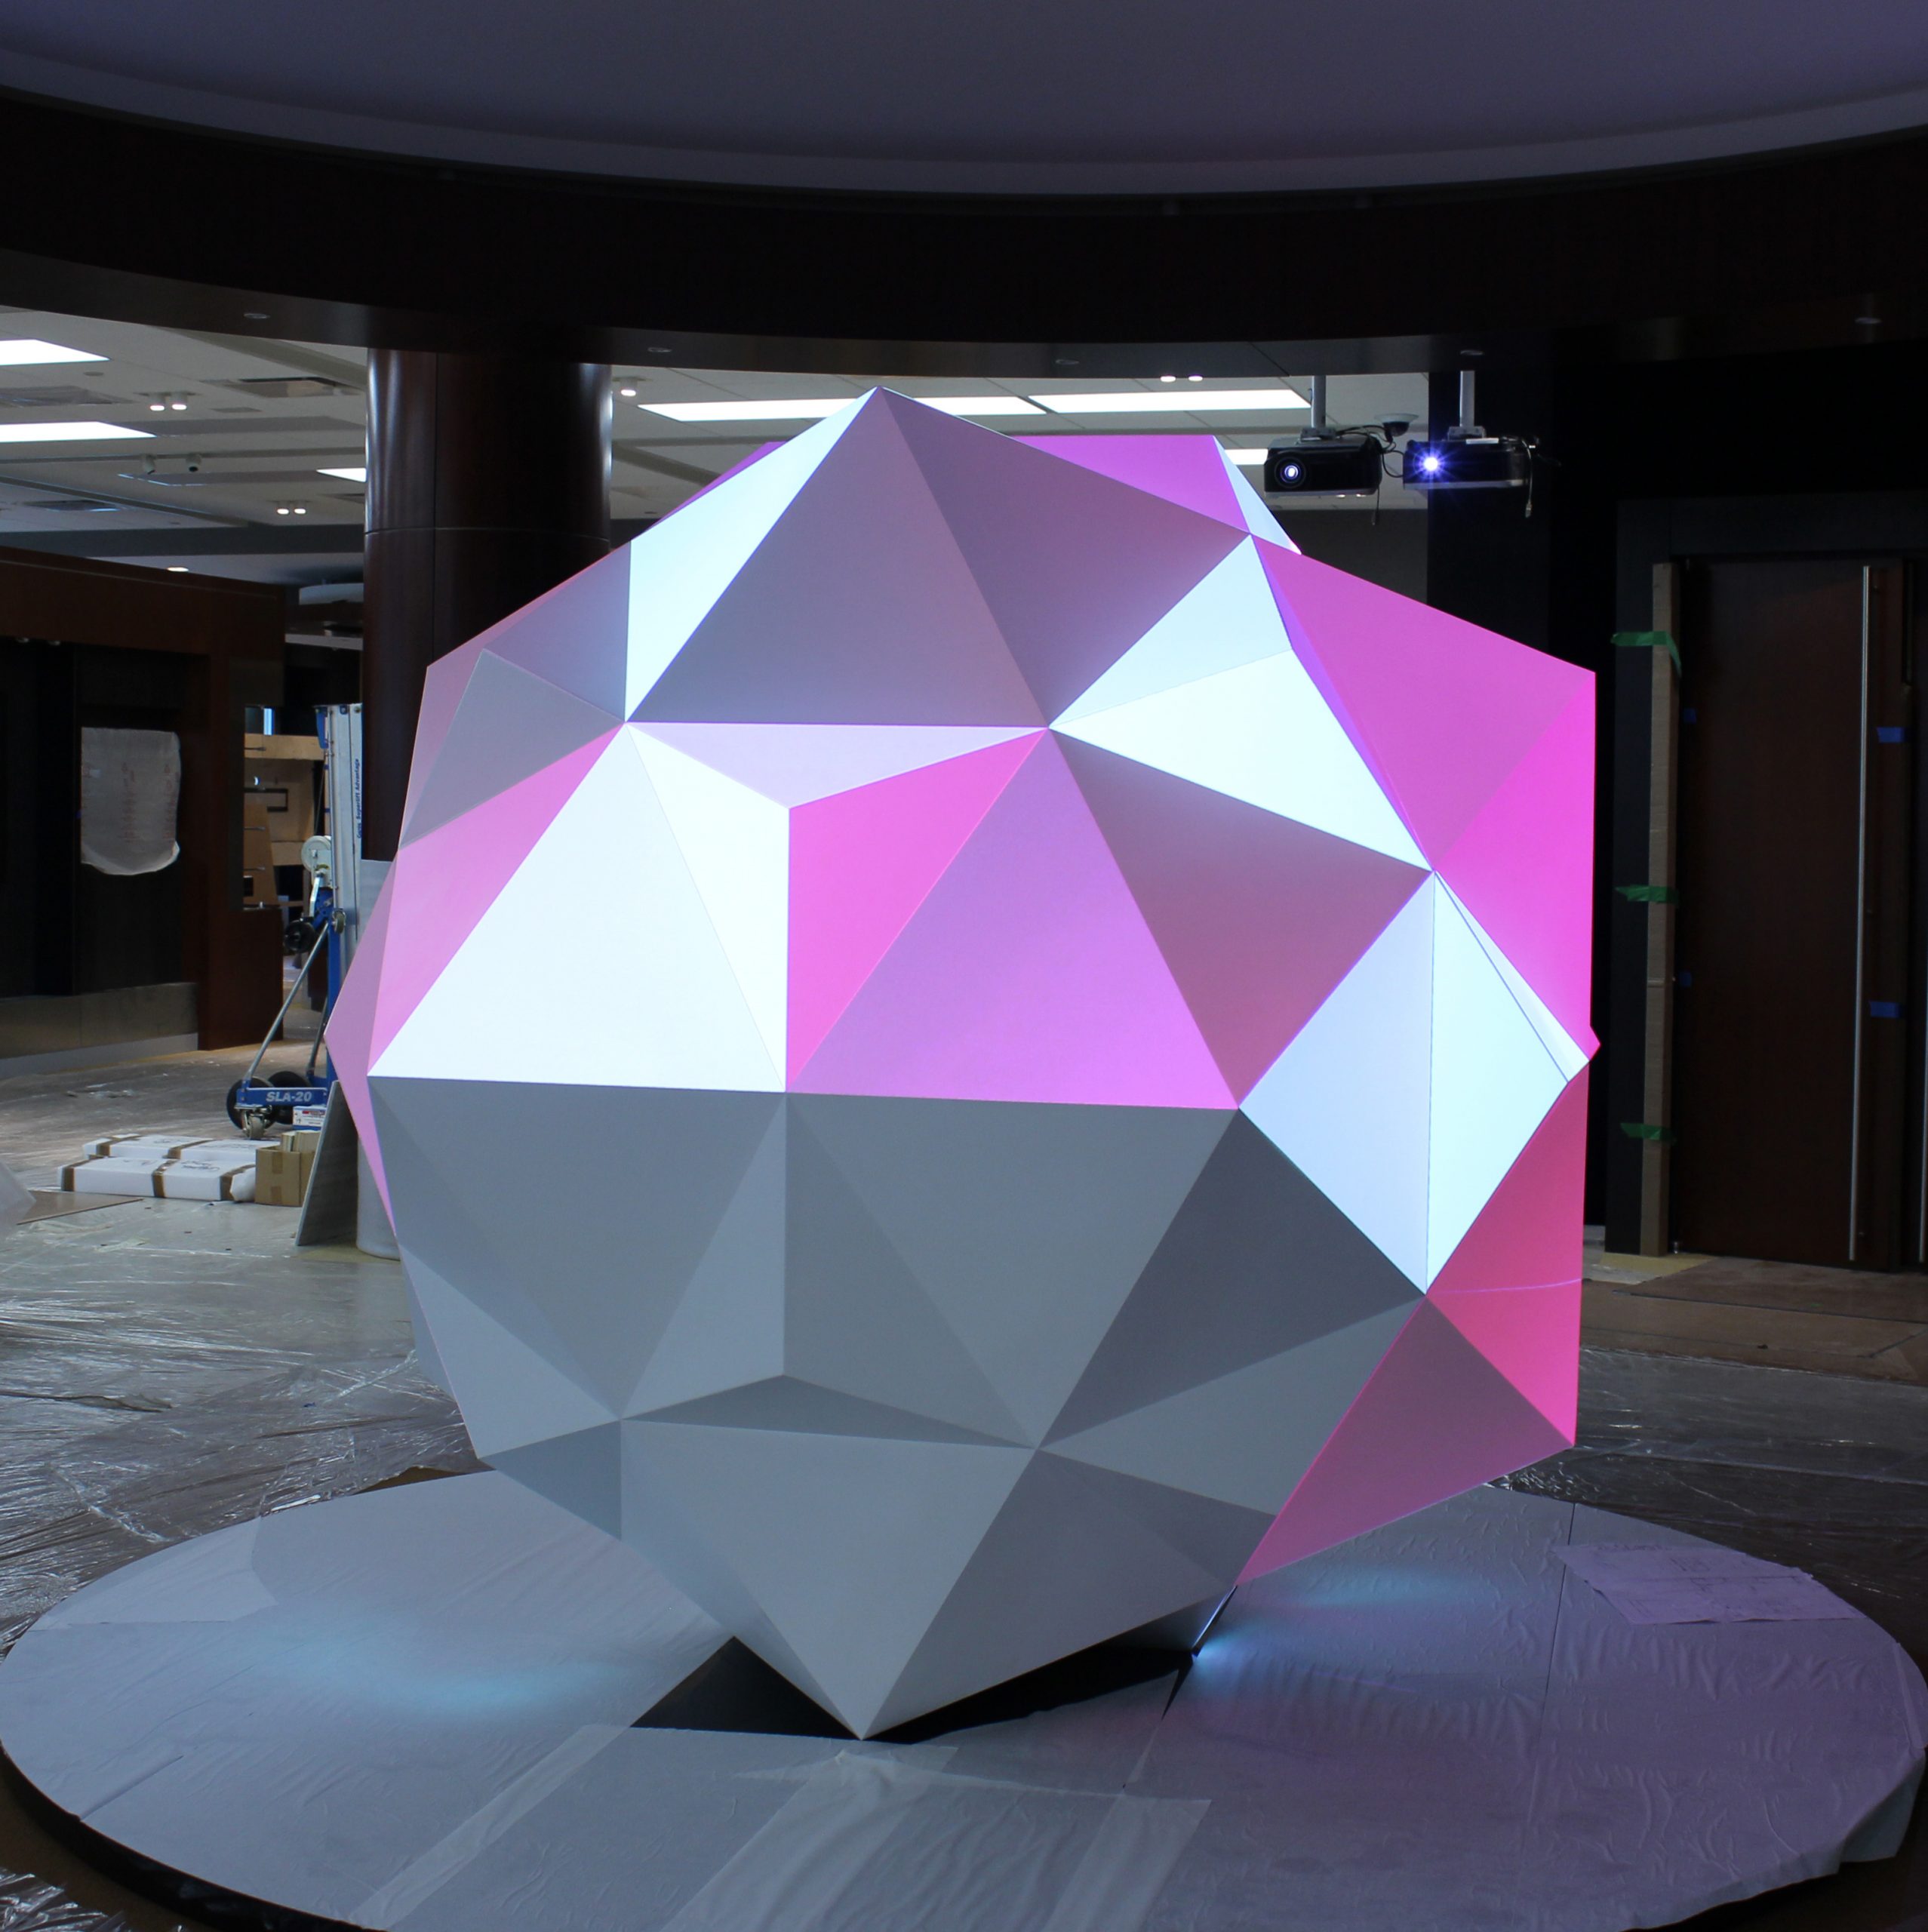 Canon “Icosidodecahedron”